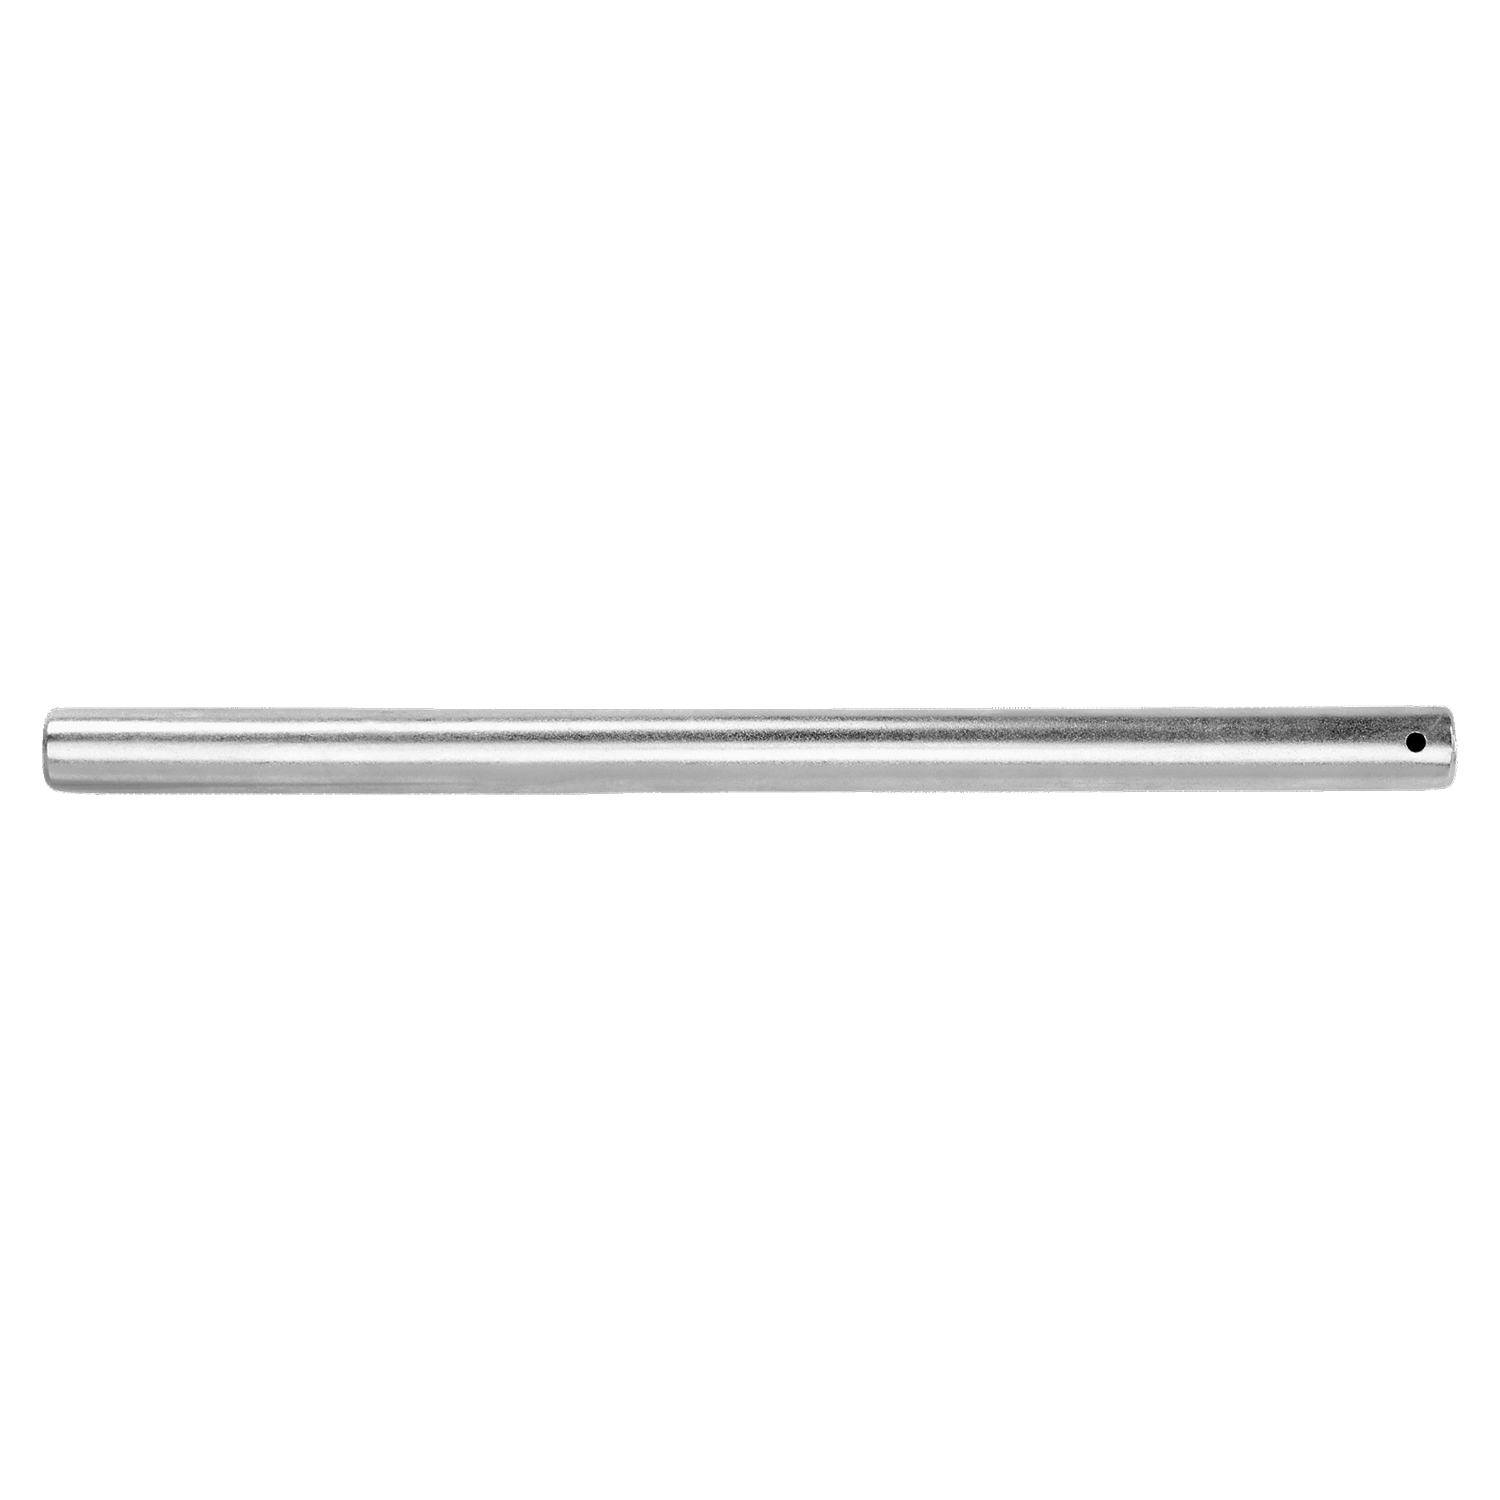 BAHCO 26S Stepped Tommy Bar With Chrome Finish (BAHCO Tools) - Premium Stepped Tommy Bar from BAHCO - Shop now at Yew Aik.